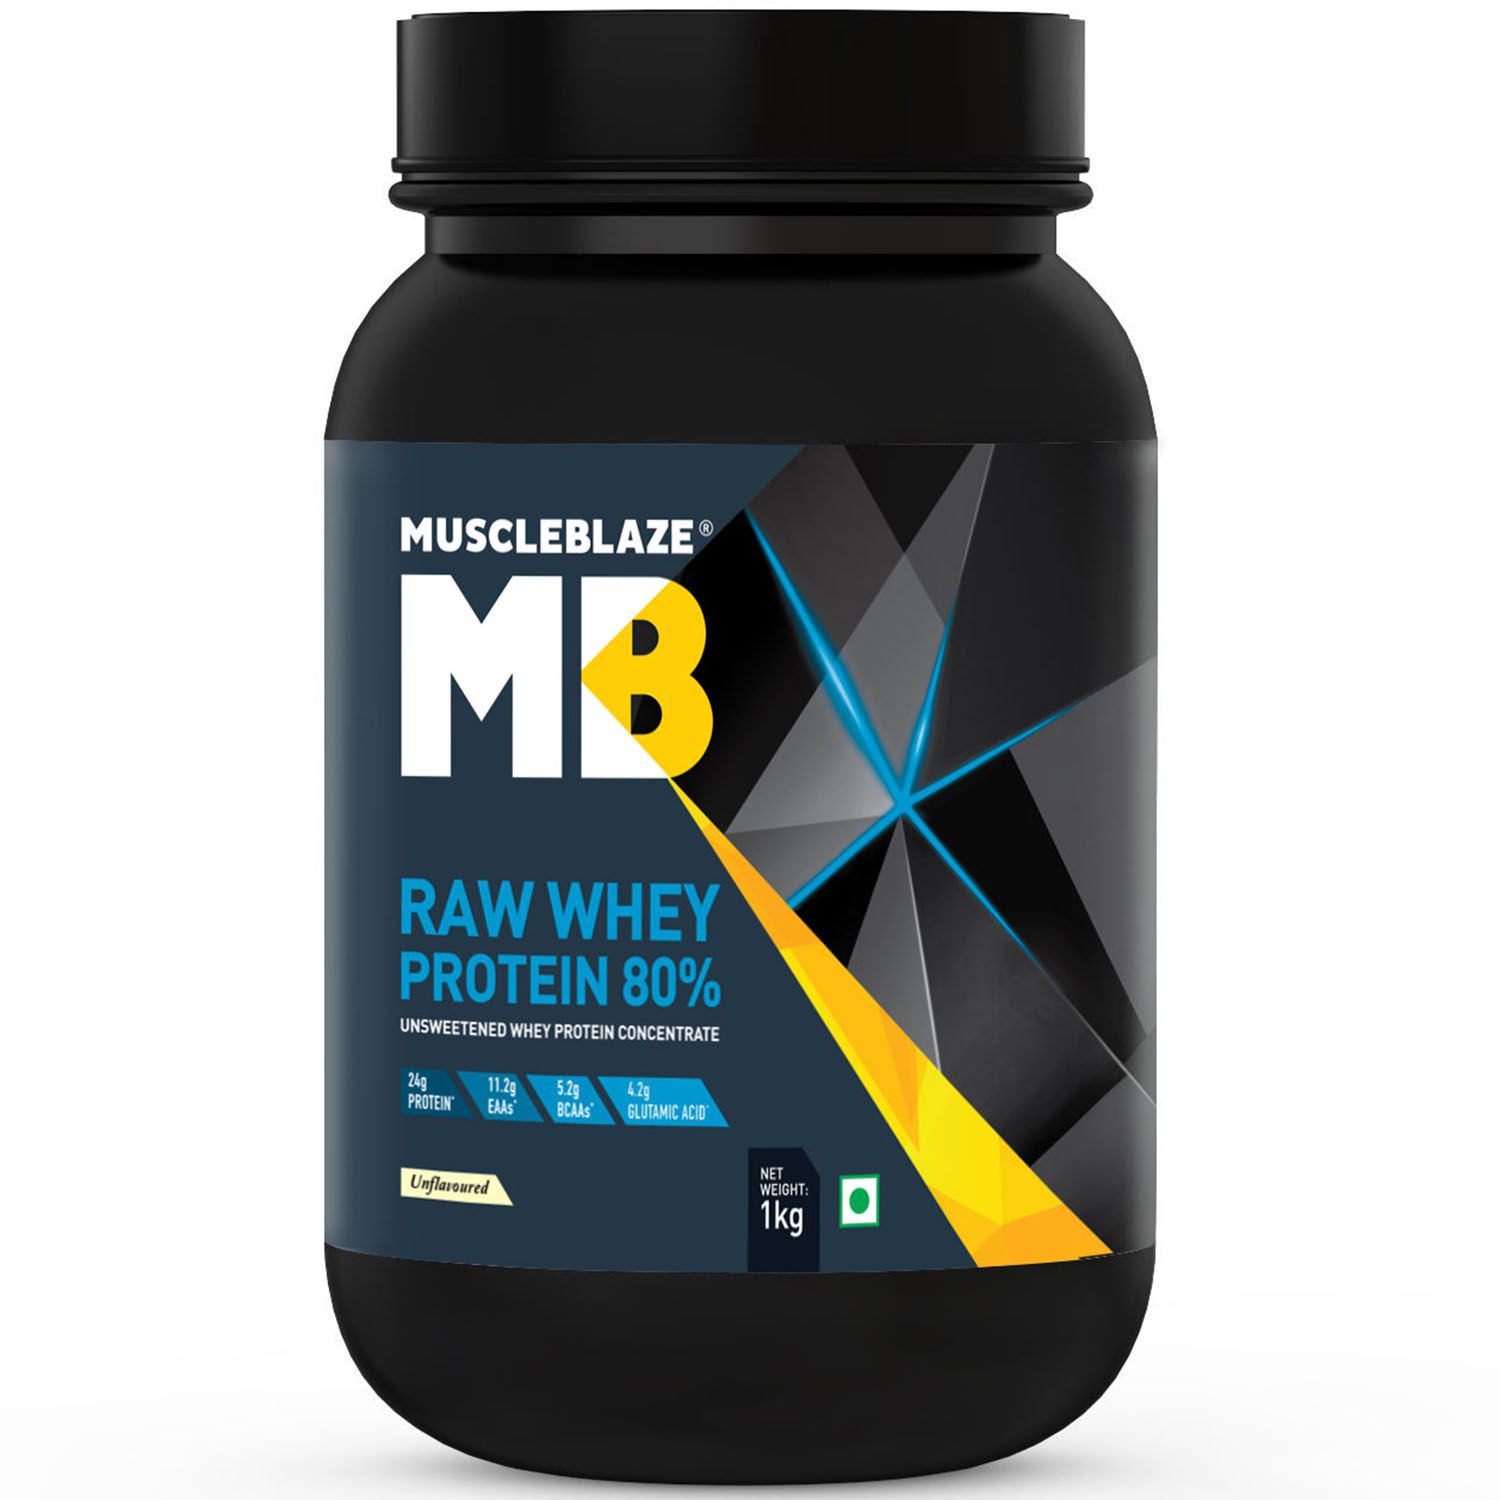 Buy Muscleblaze Raw Whey Protein Concentrate 80 With Digestive Enzymes